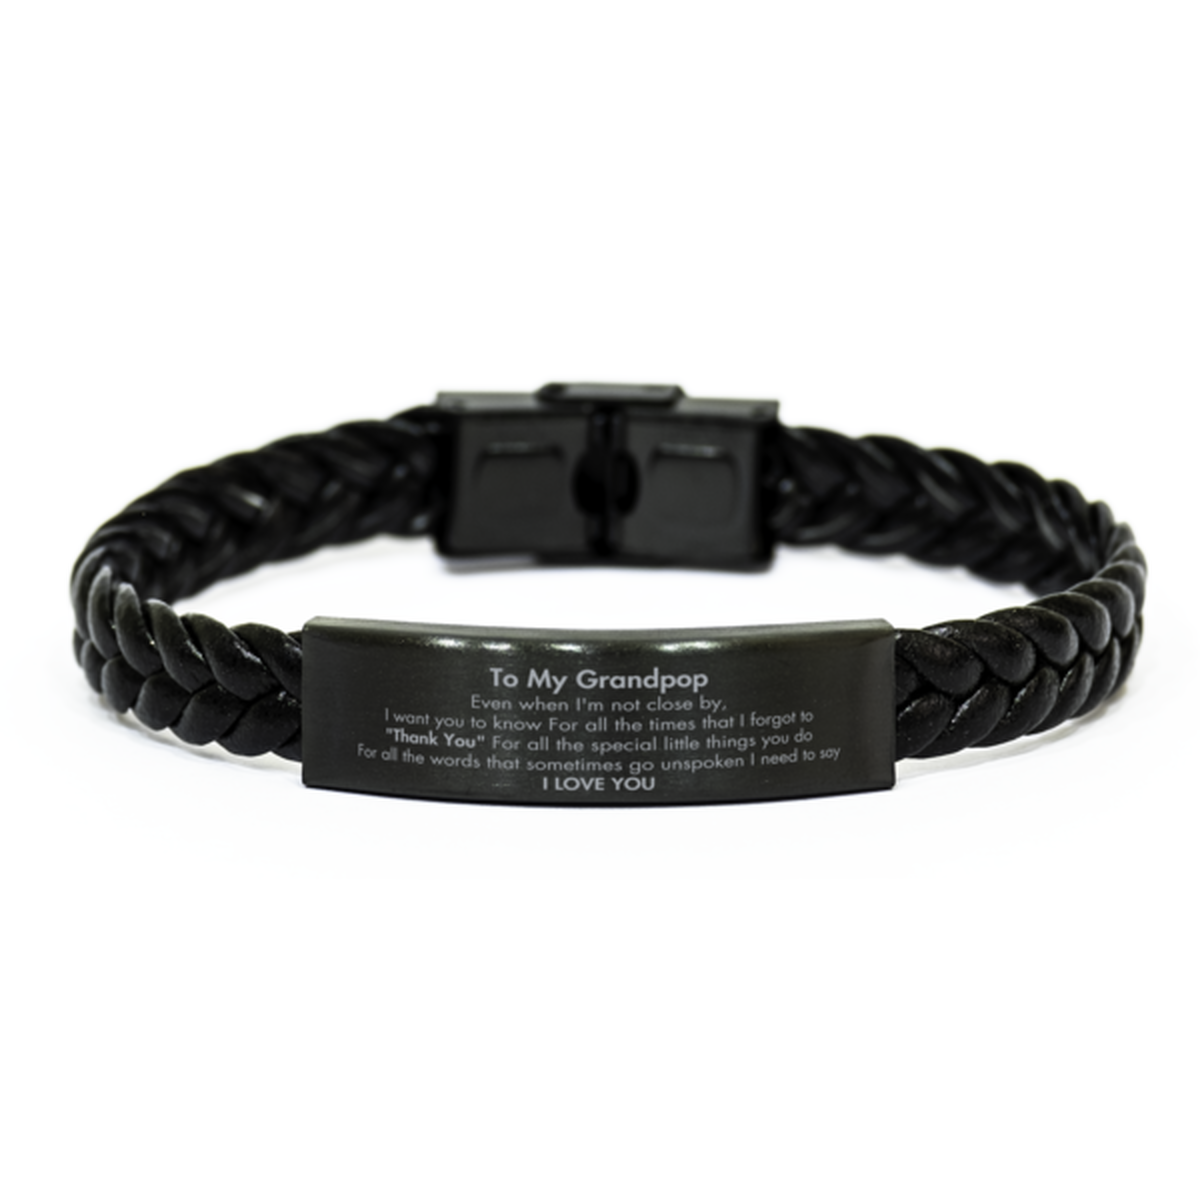 Thank You Gifts for Grandpop, Keepsake Braided Leather Bracelet Gifts for Grandpop Birthday Mother's day Father's Day Grandpop For all the words That sometimes go unspoken I need to say I LOVE YOU